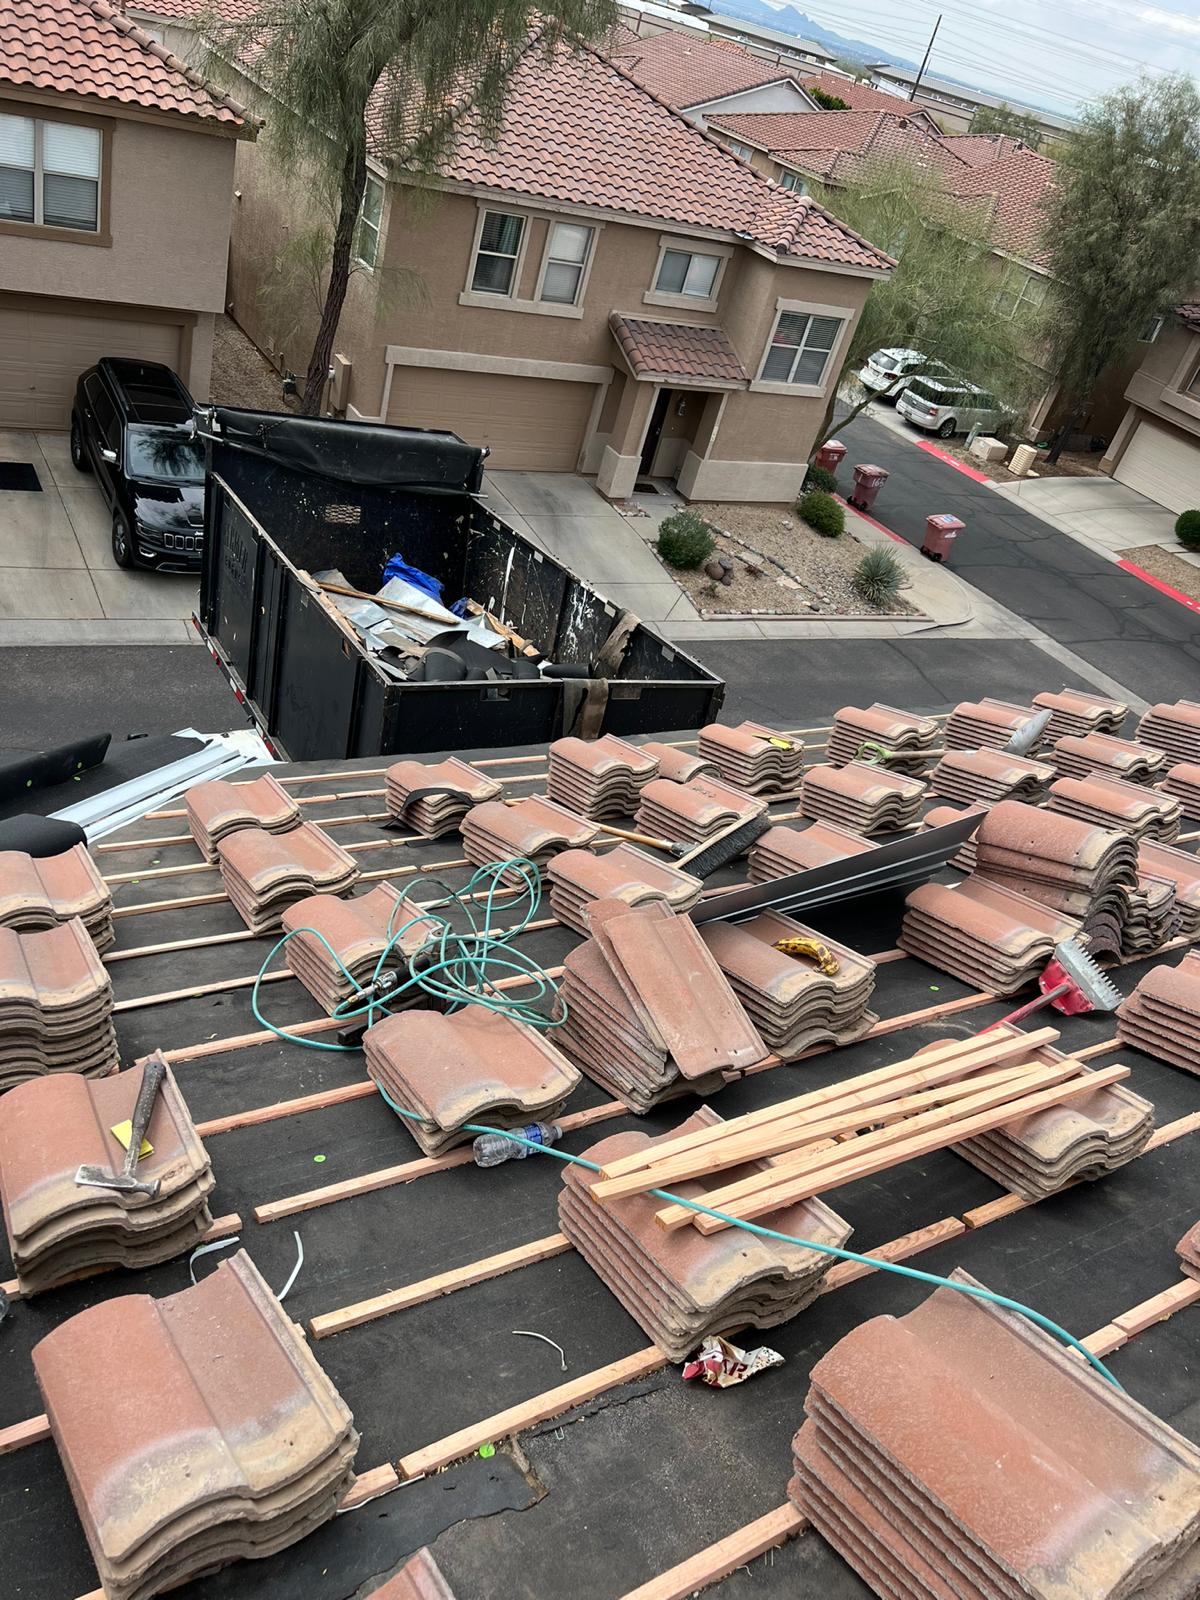 Stacks of tiles ready for positioning on a McCormick Ranch rooftop.